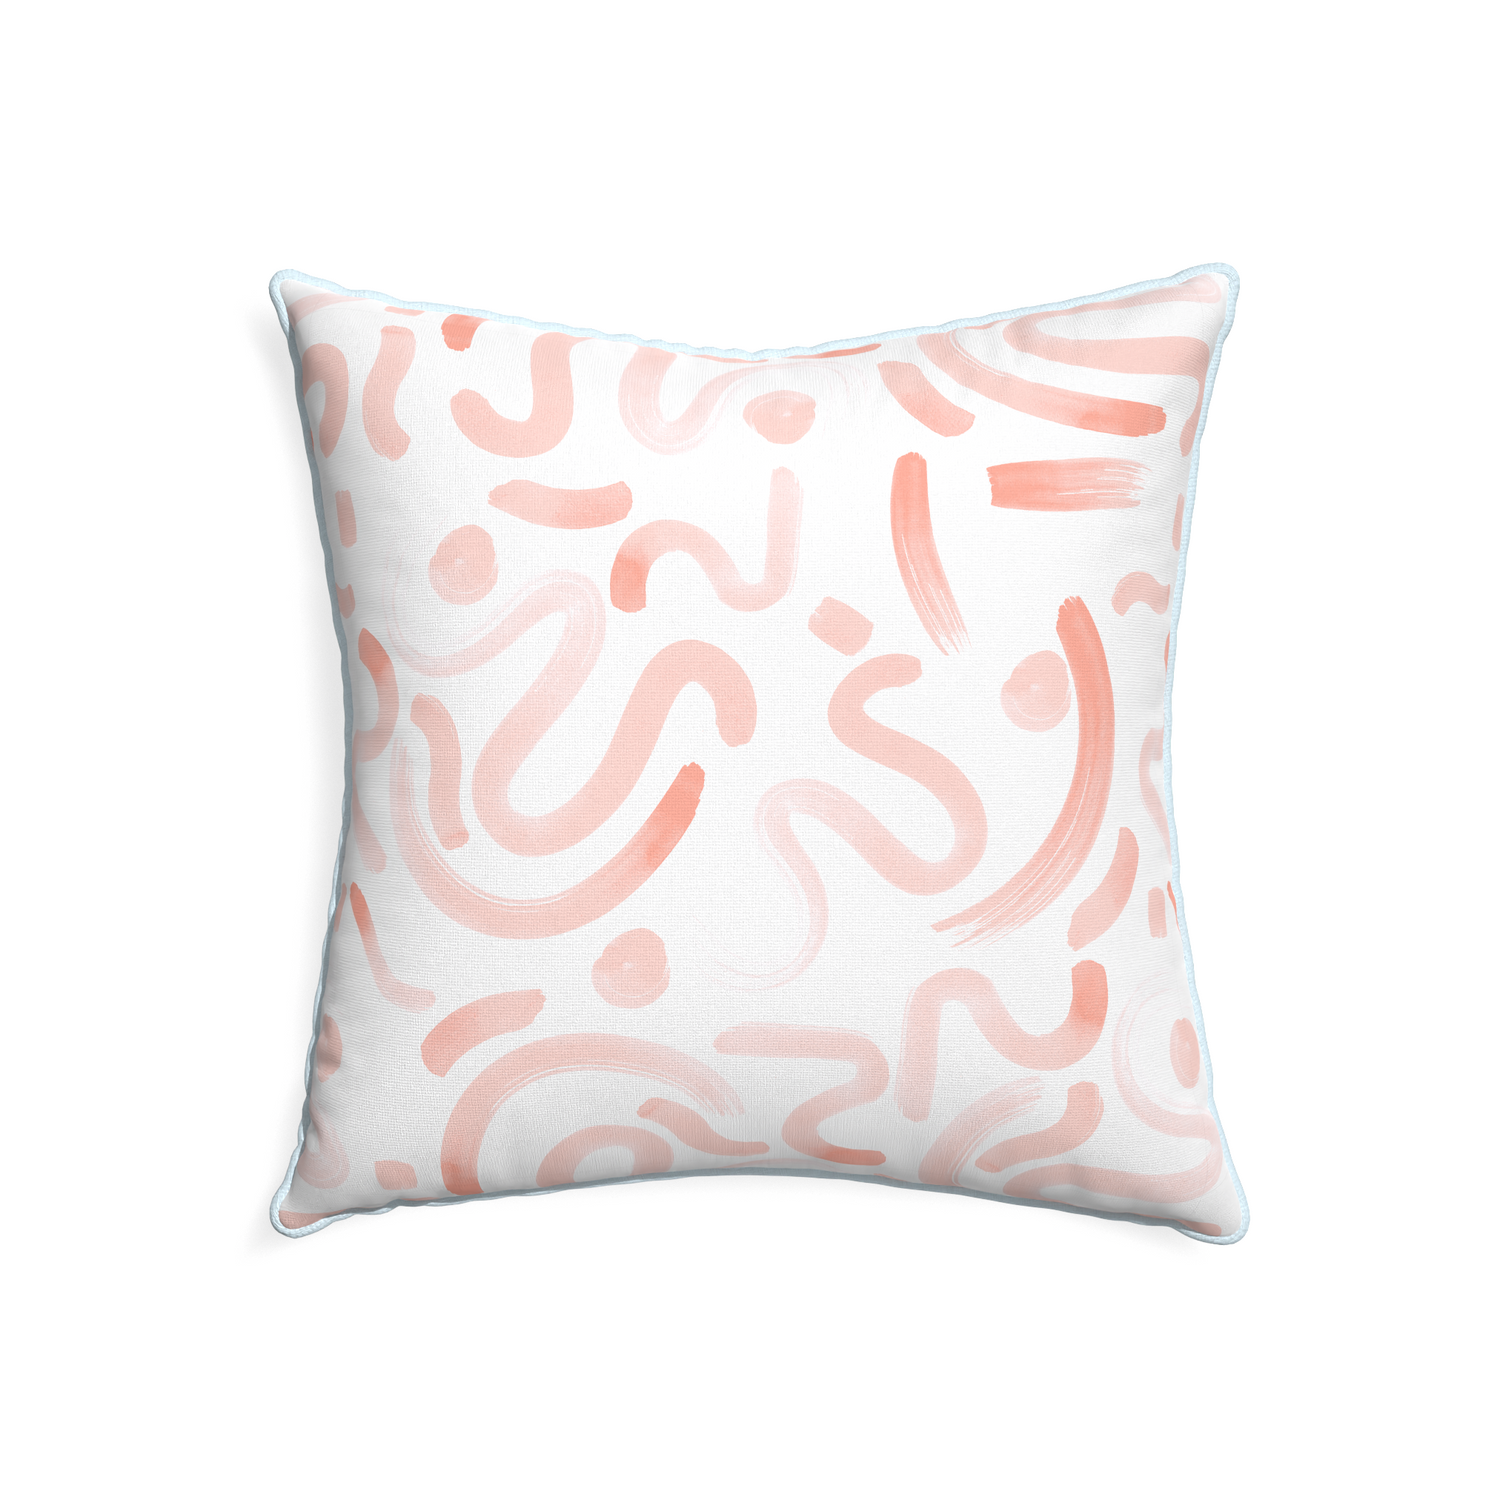 22-square hockney pink custom pink graphicpillow with powder piping on white background